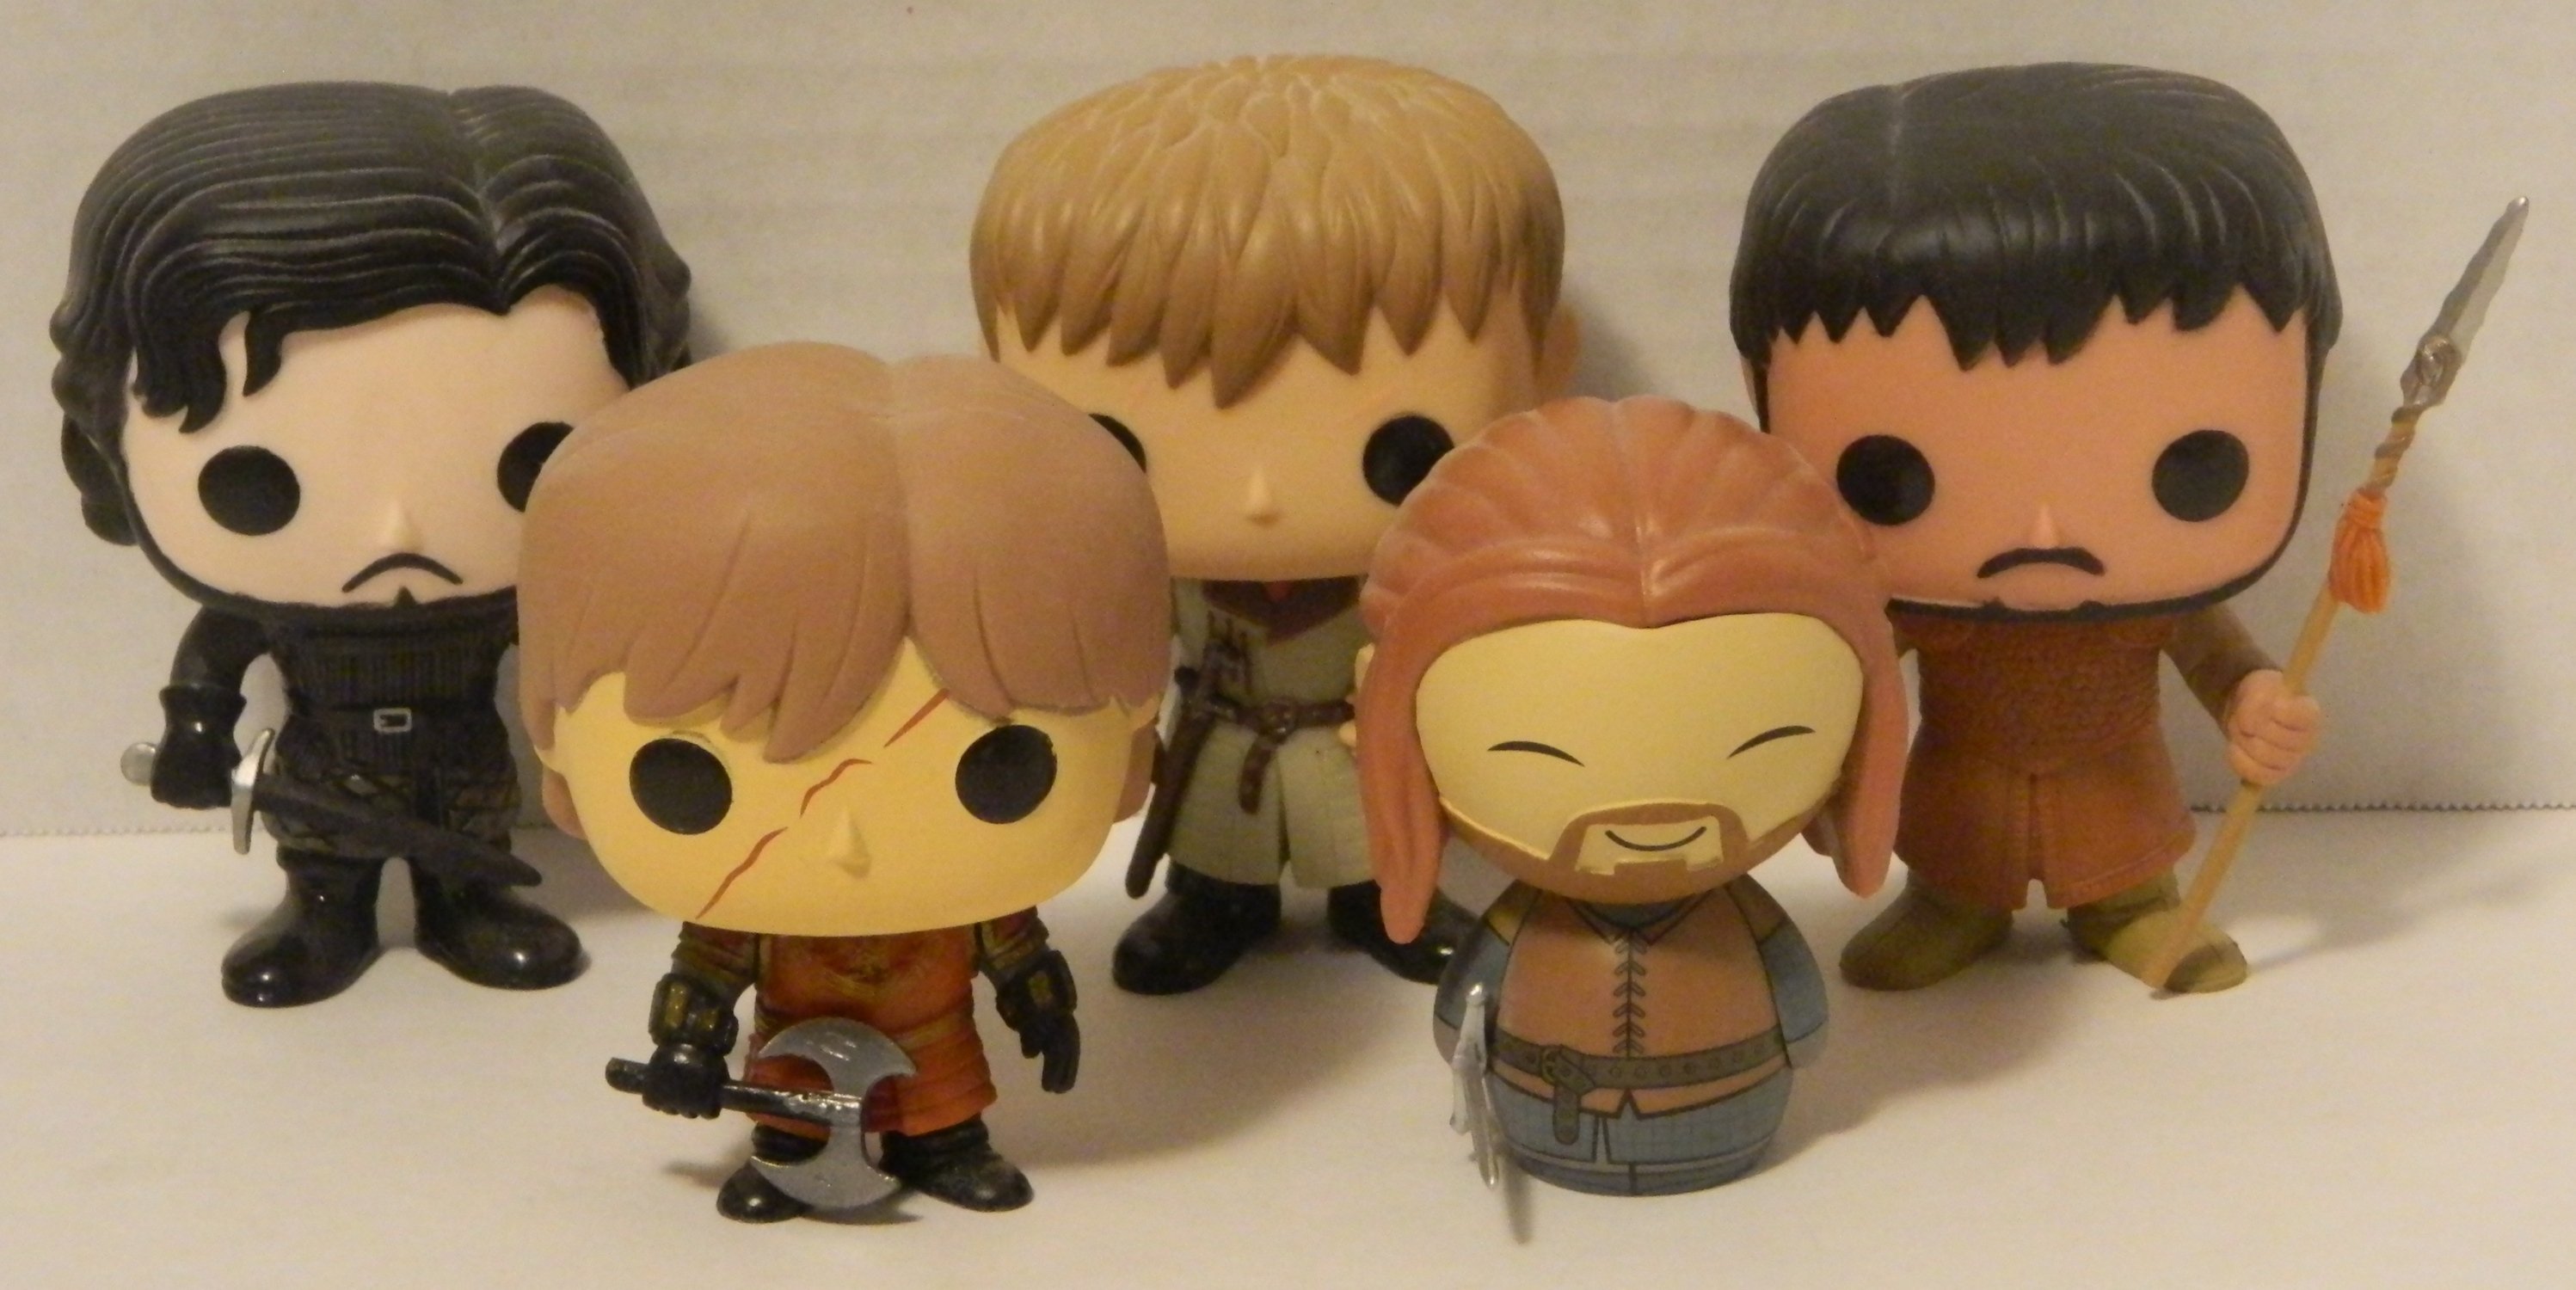 Game Of Thrones 3" Mystery Minis By Funko ROBB STARK 2/24